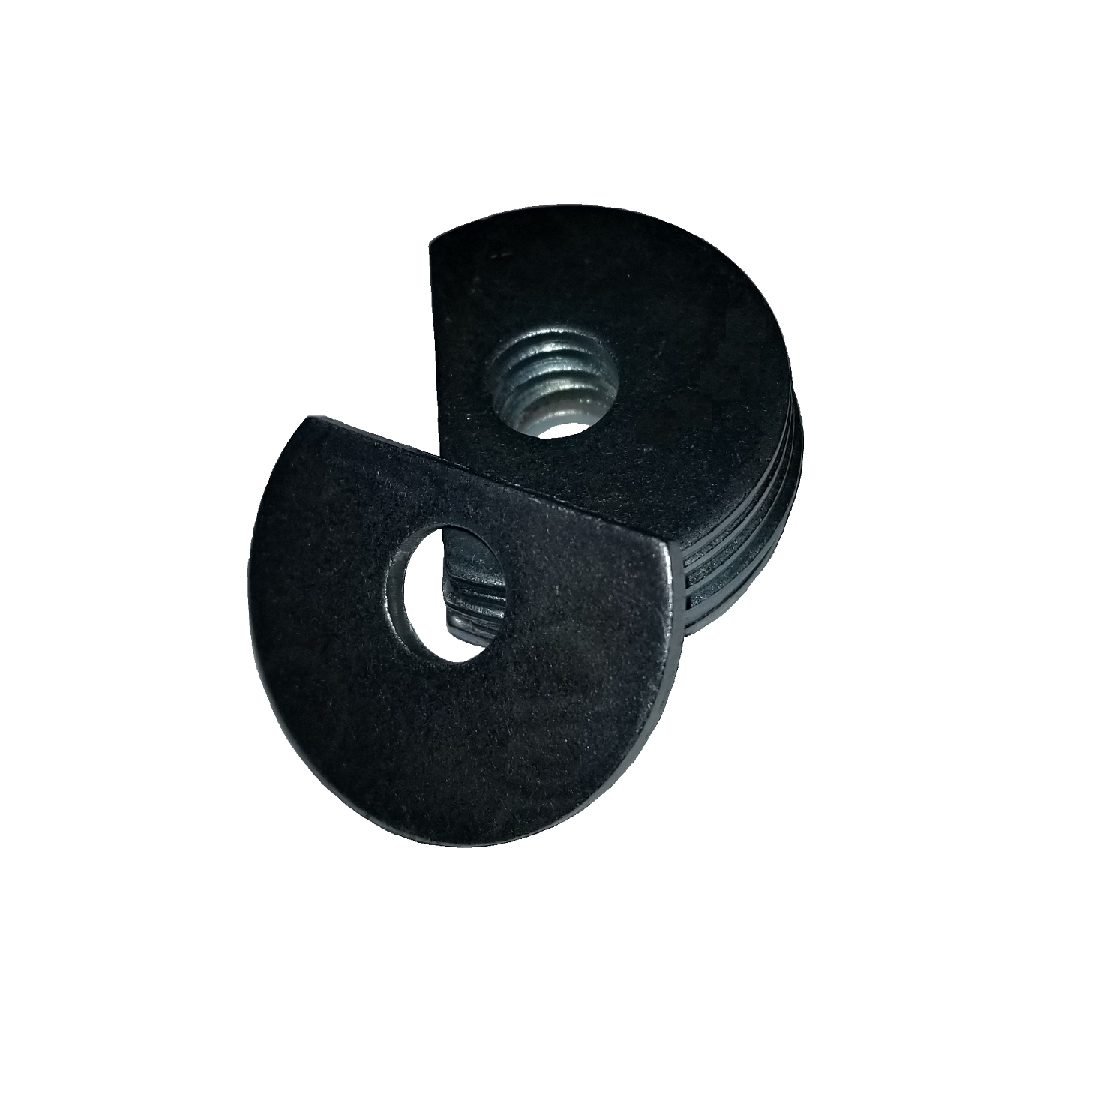 Clipped OD Washer - 0.656 ID, 1.750 OD, 0.250 Thick, Low Carbon Steel - Soft, Zinc & Clear